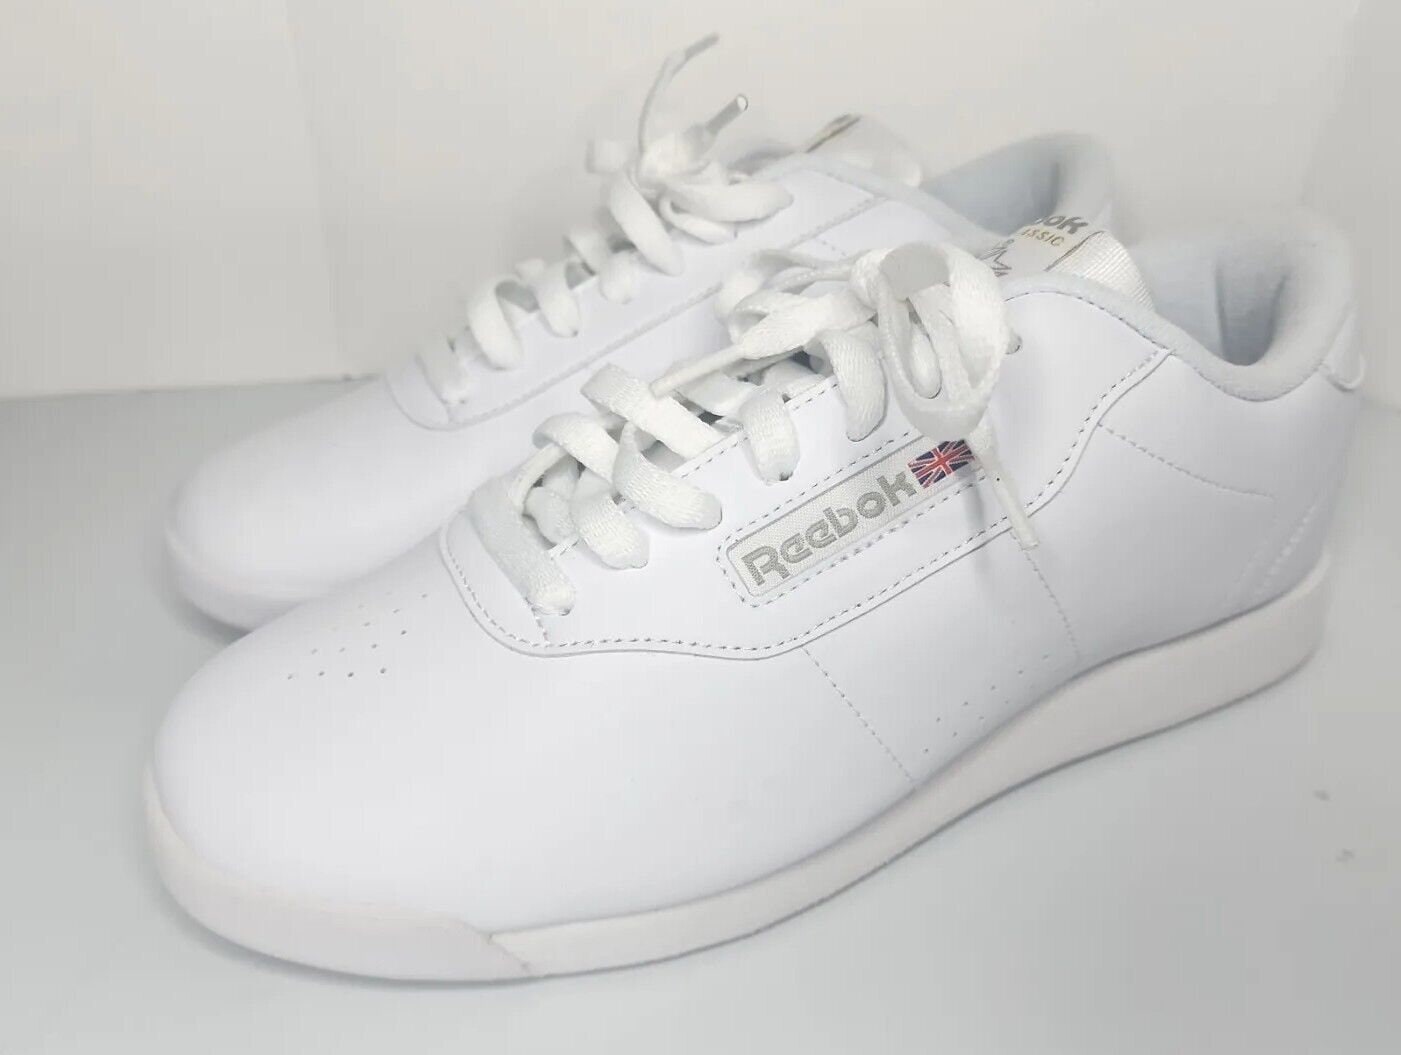 Reebok Classic Princess Sneakers 30500 Size 10 Wide - Etsy